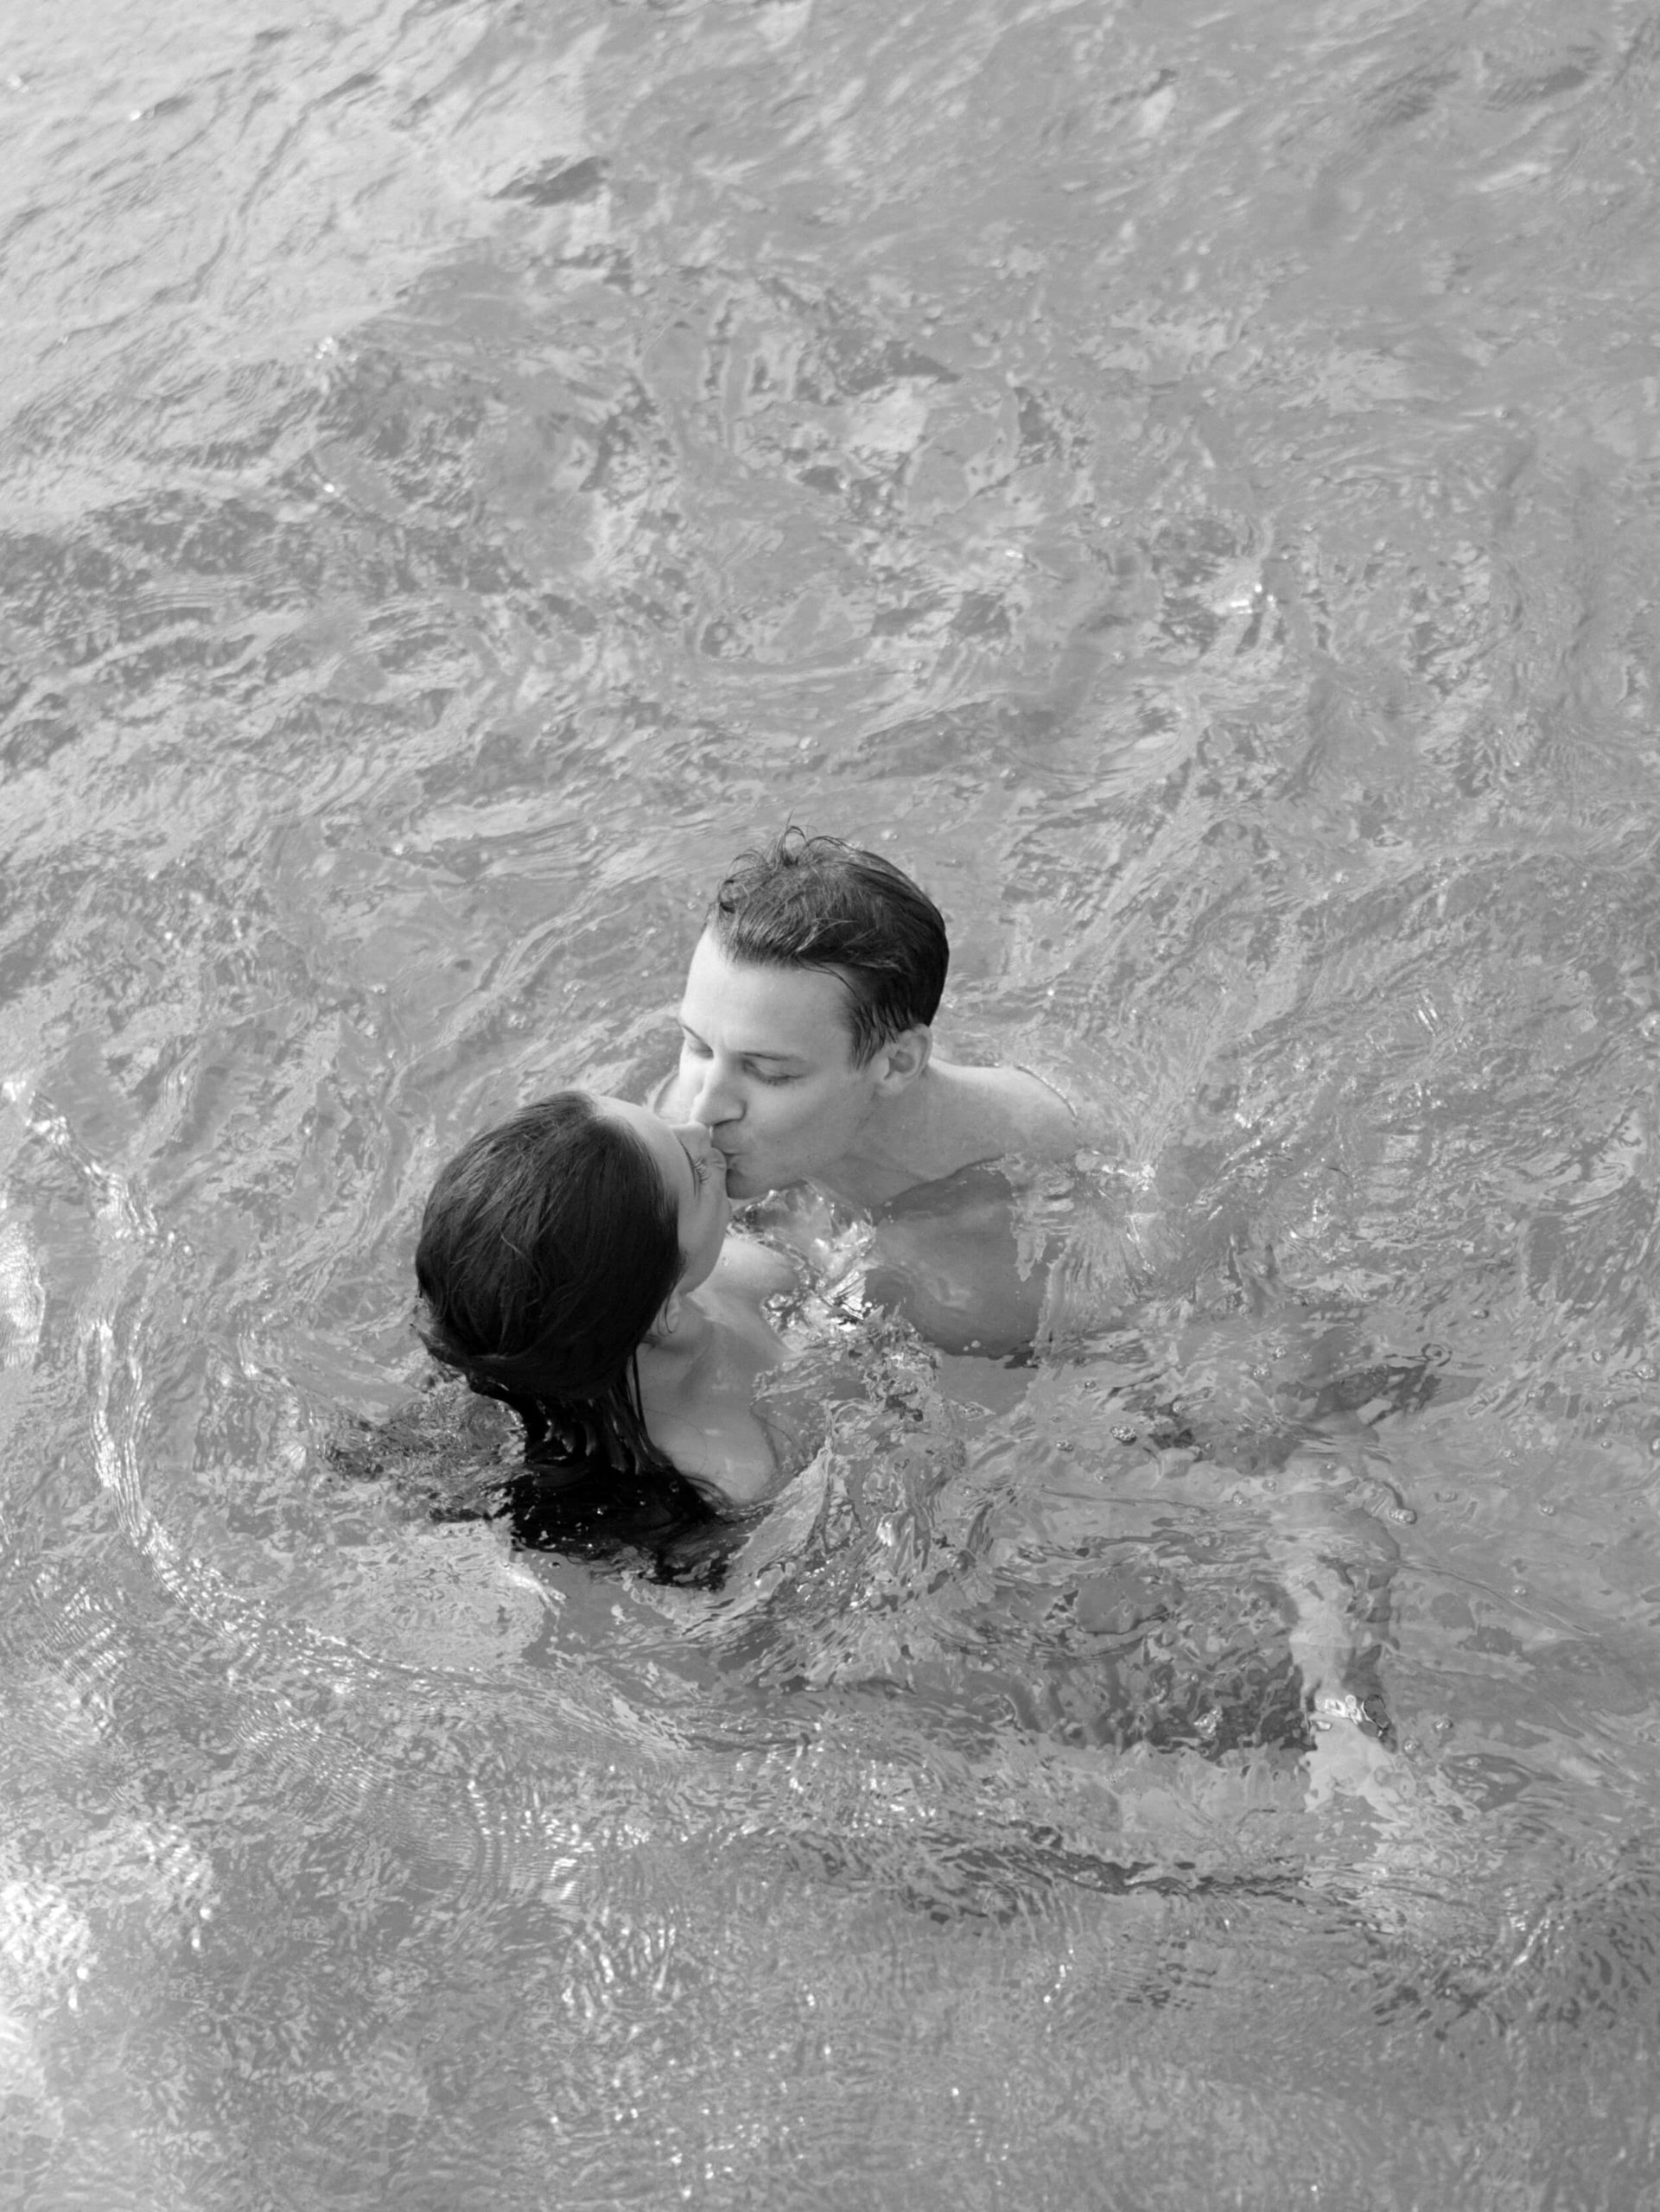 Liz and Dave kissing in the water